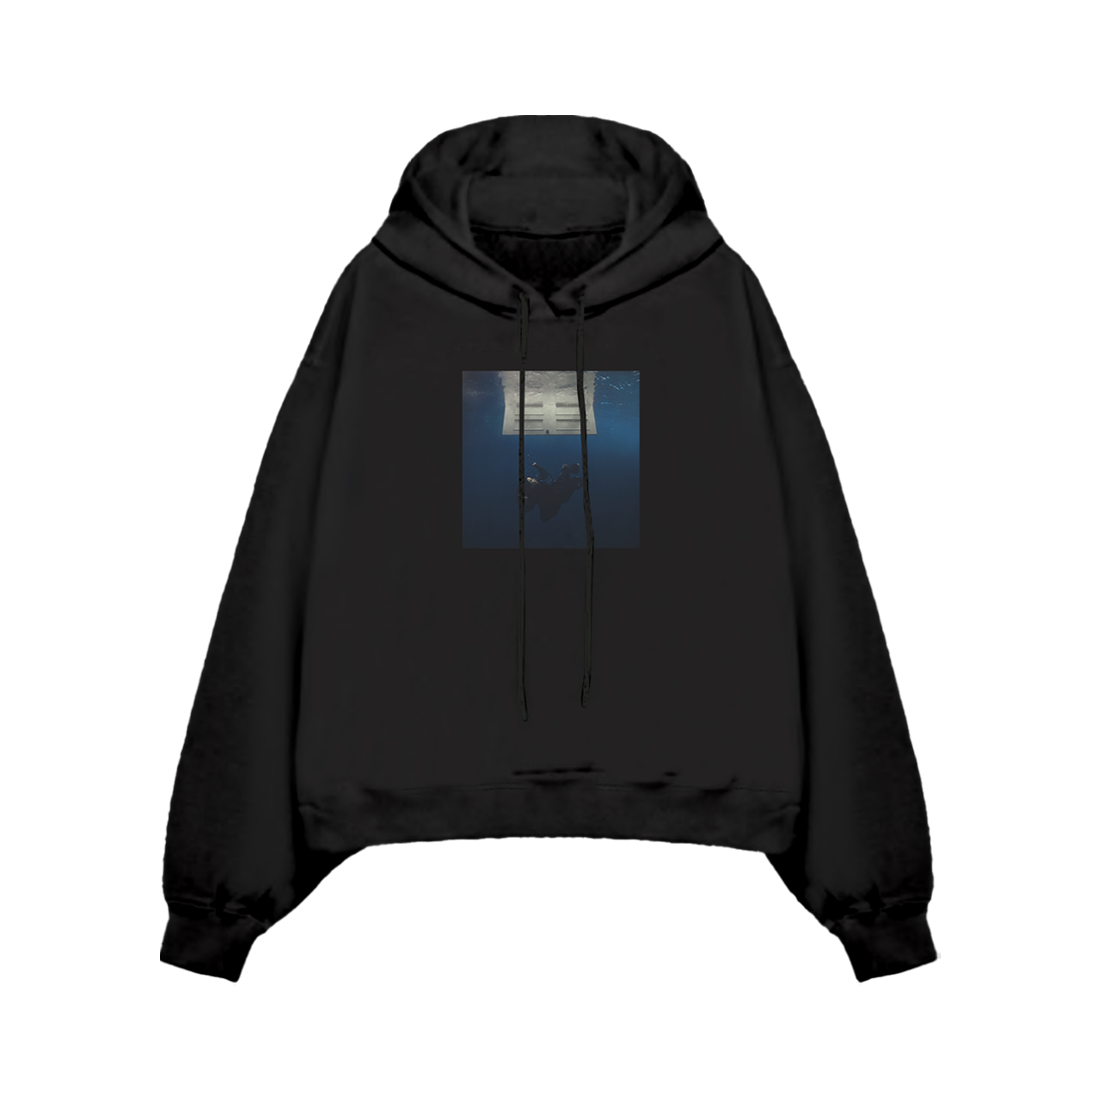 HIT ME HARD AND SOFT Pullover hoodie noir cover